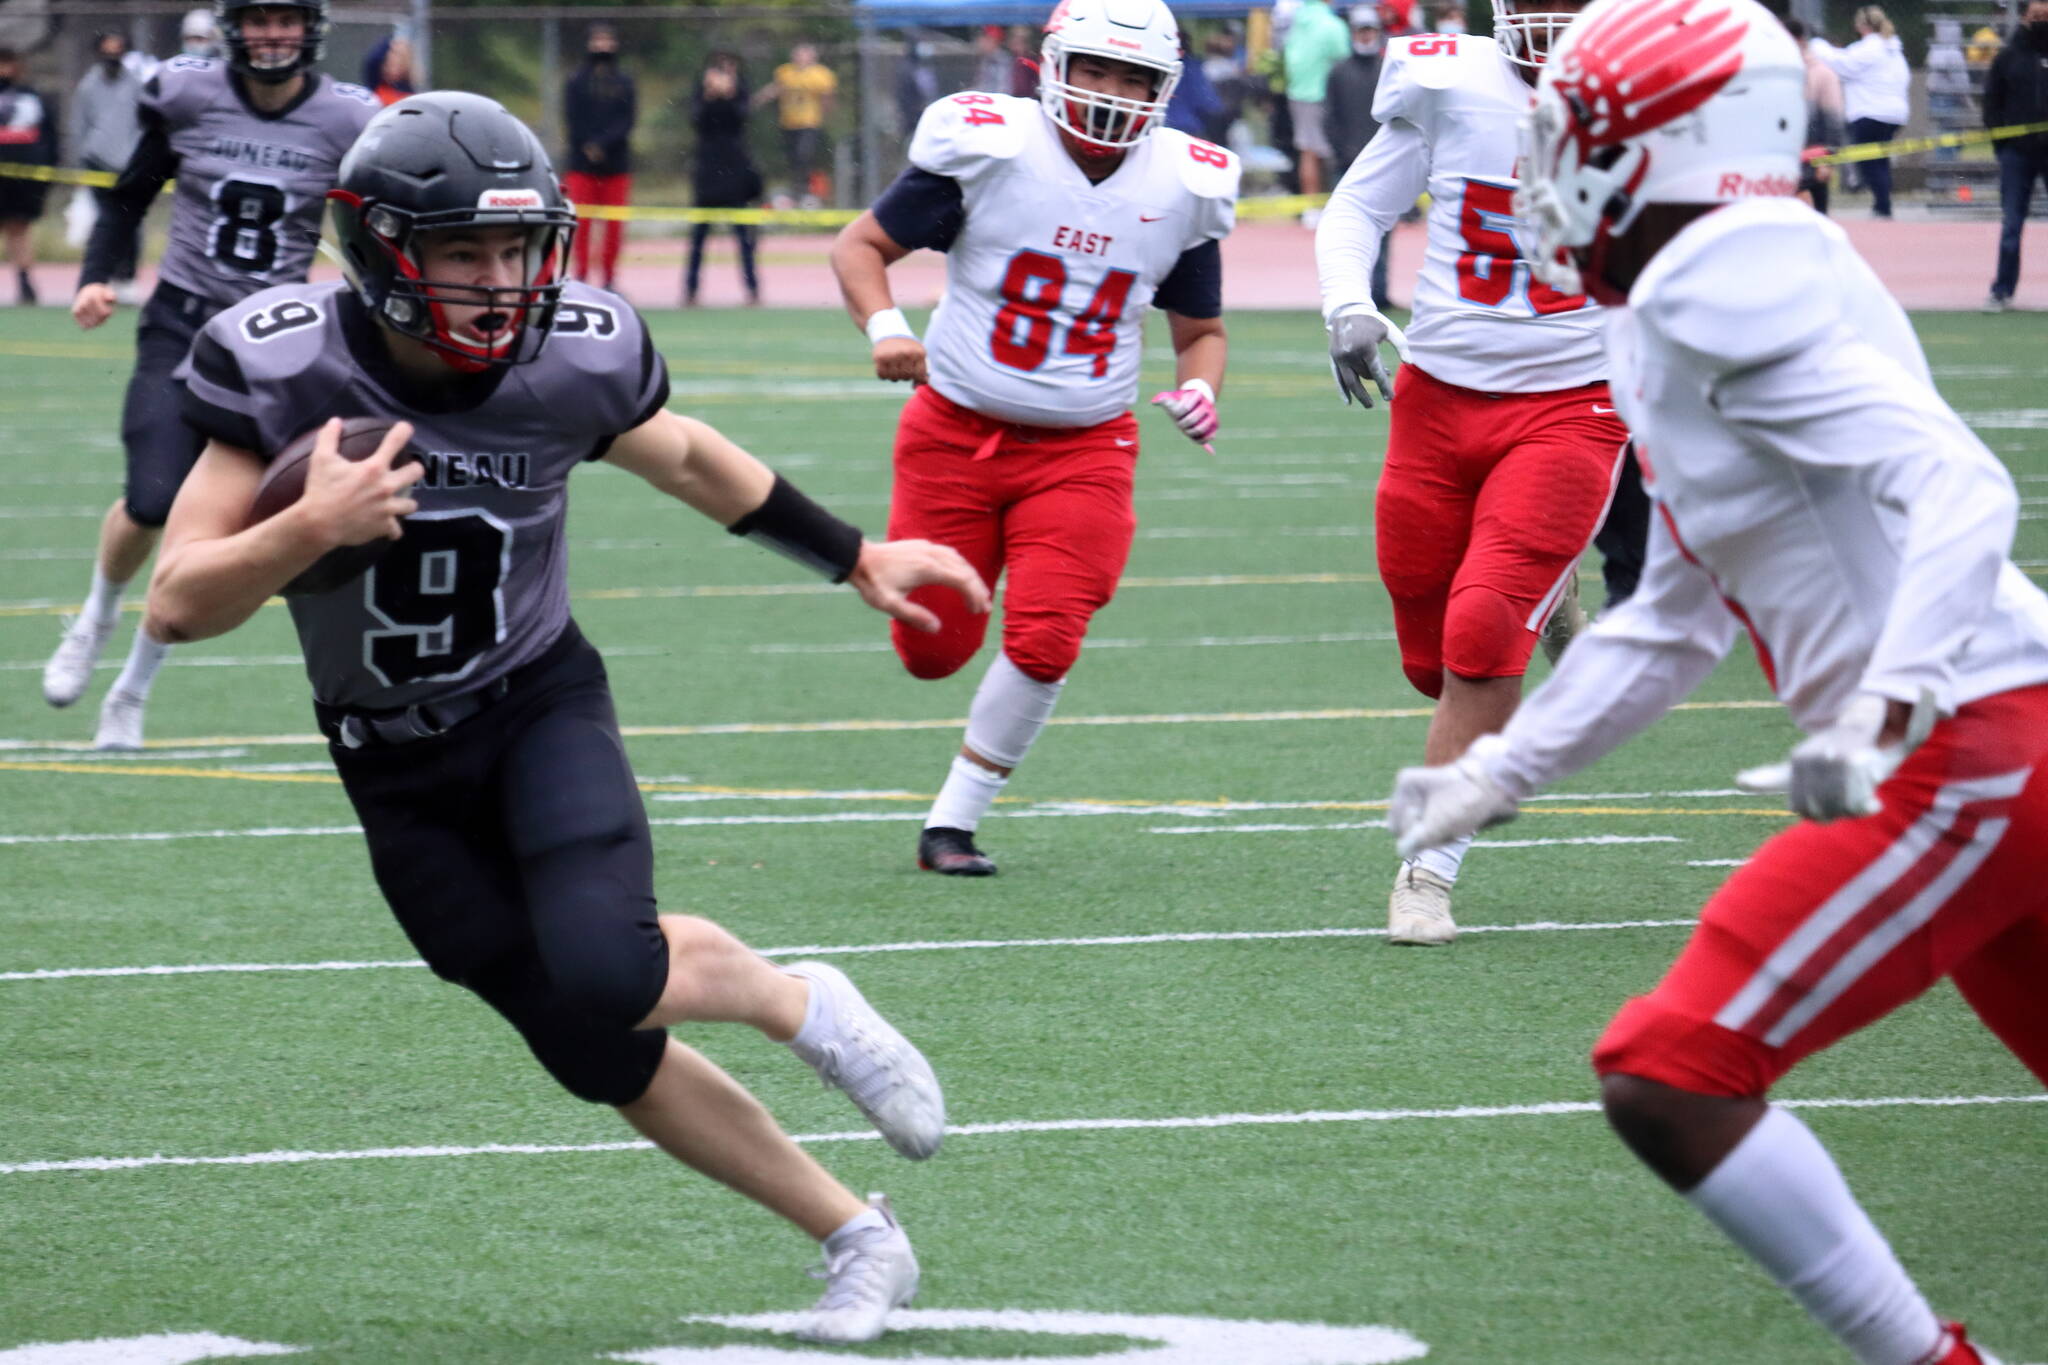 Payton Grant, left, plays football against East Anchorage High School on Sept. 4, 2021. Grant scored in last week’s away game against Service High School. (Ben Hohenstatt / Juneau Empire File)